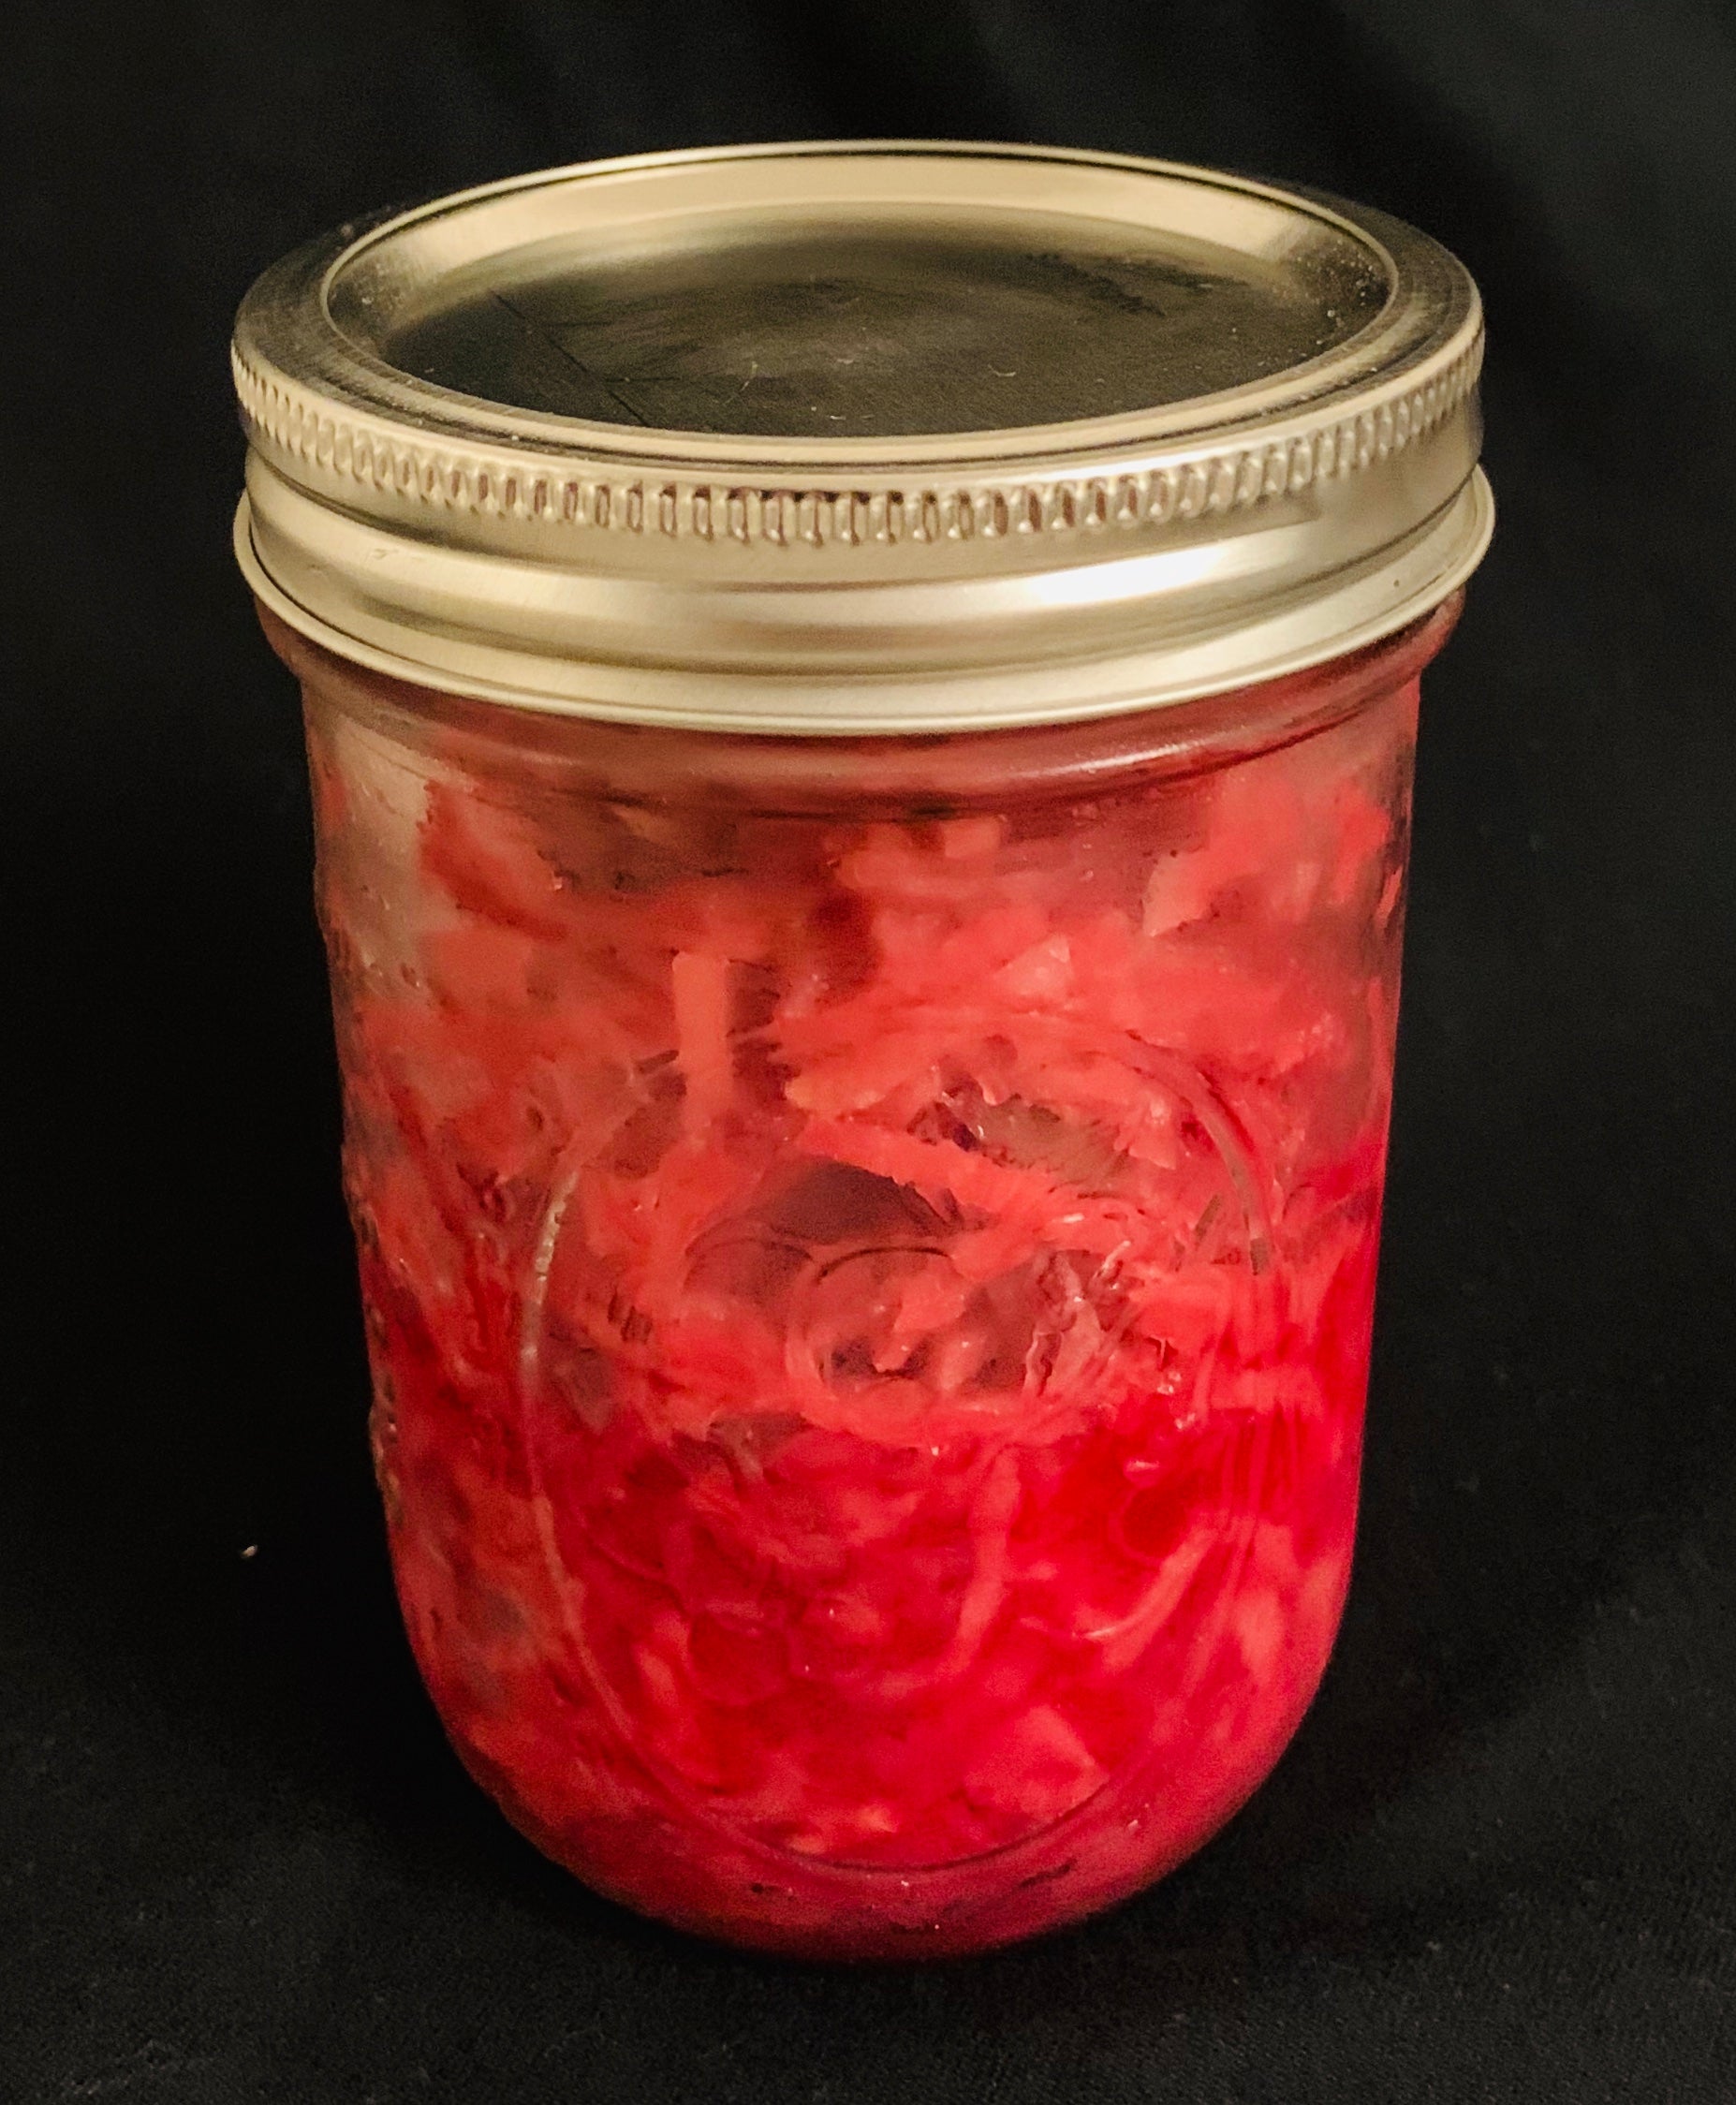 Pickled Ginger with Beets — ビーツ紅生姜